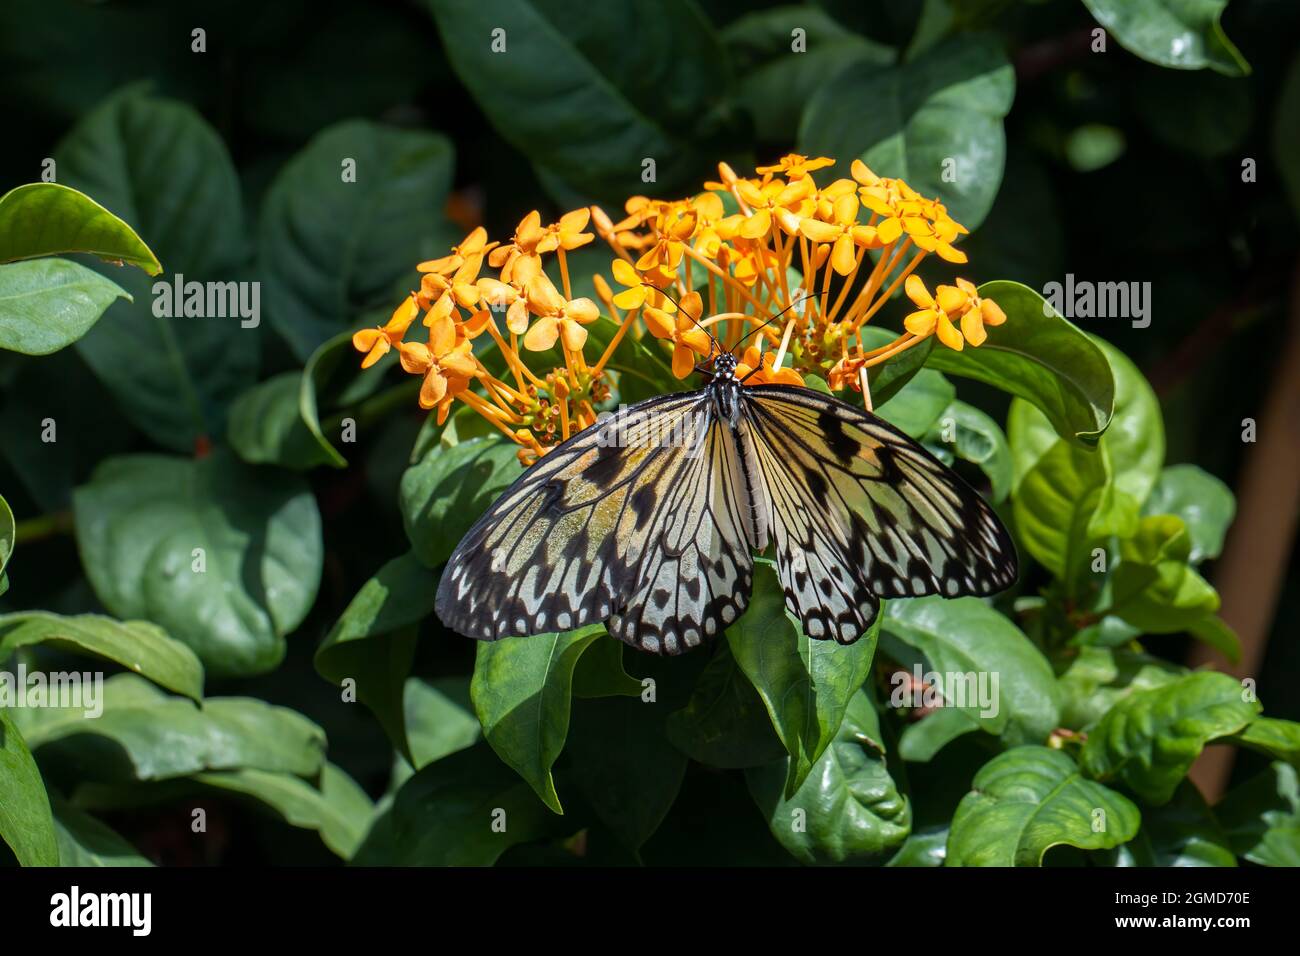 Beautif colorful tropıical butterfly called Large Tree Nymph | Paper Kite | Idea leuconoe drinking nectar of flowers in Konya tropical butterfly garde Stock Photo